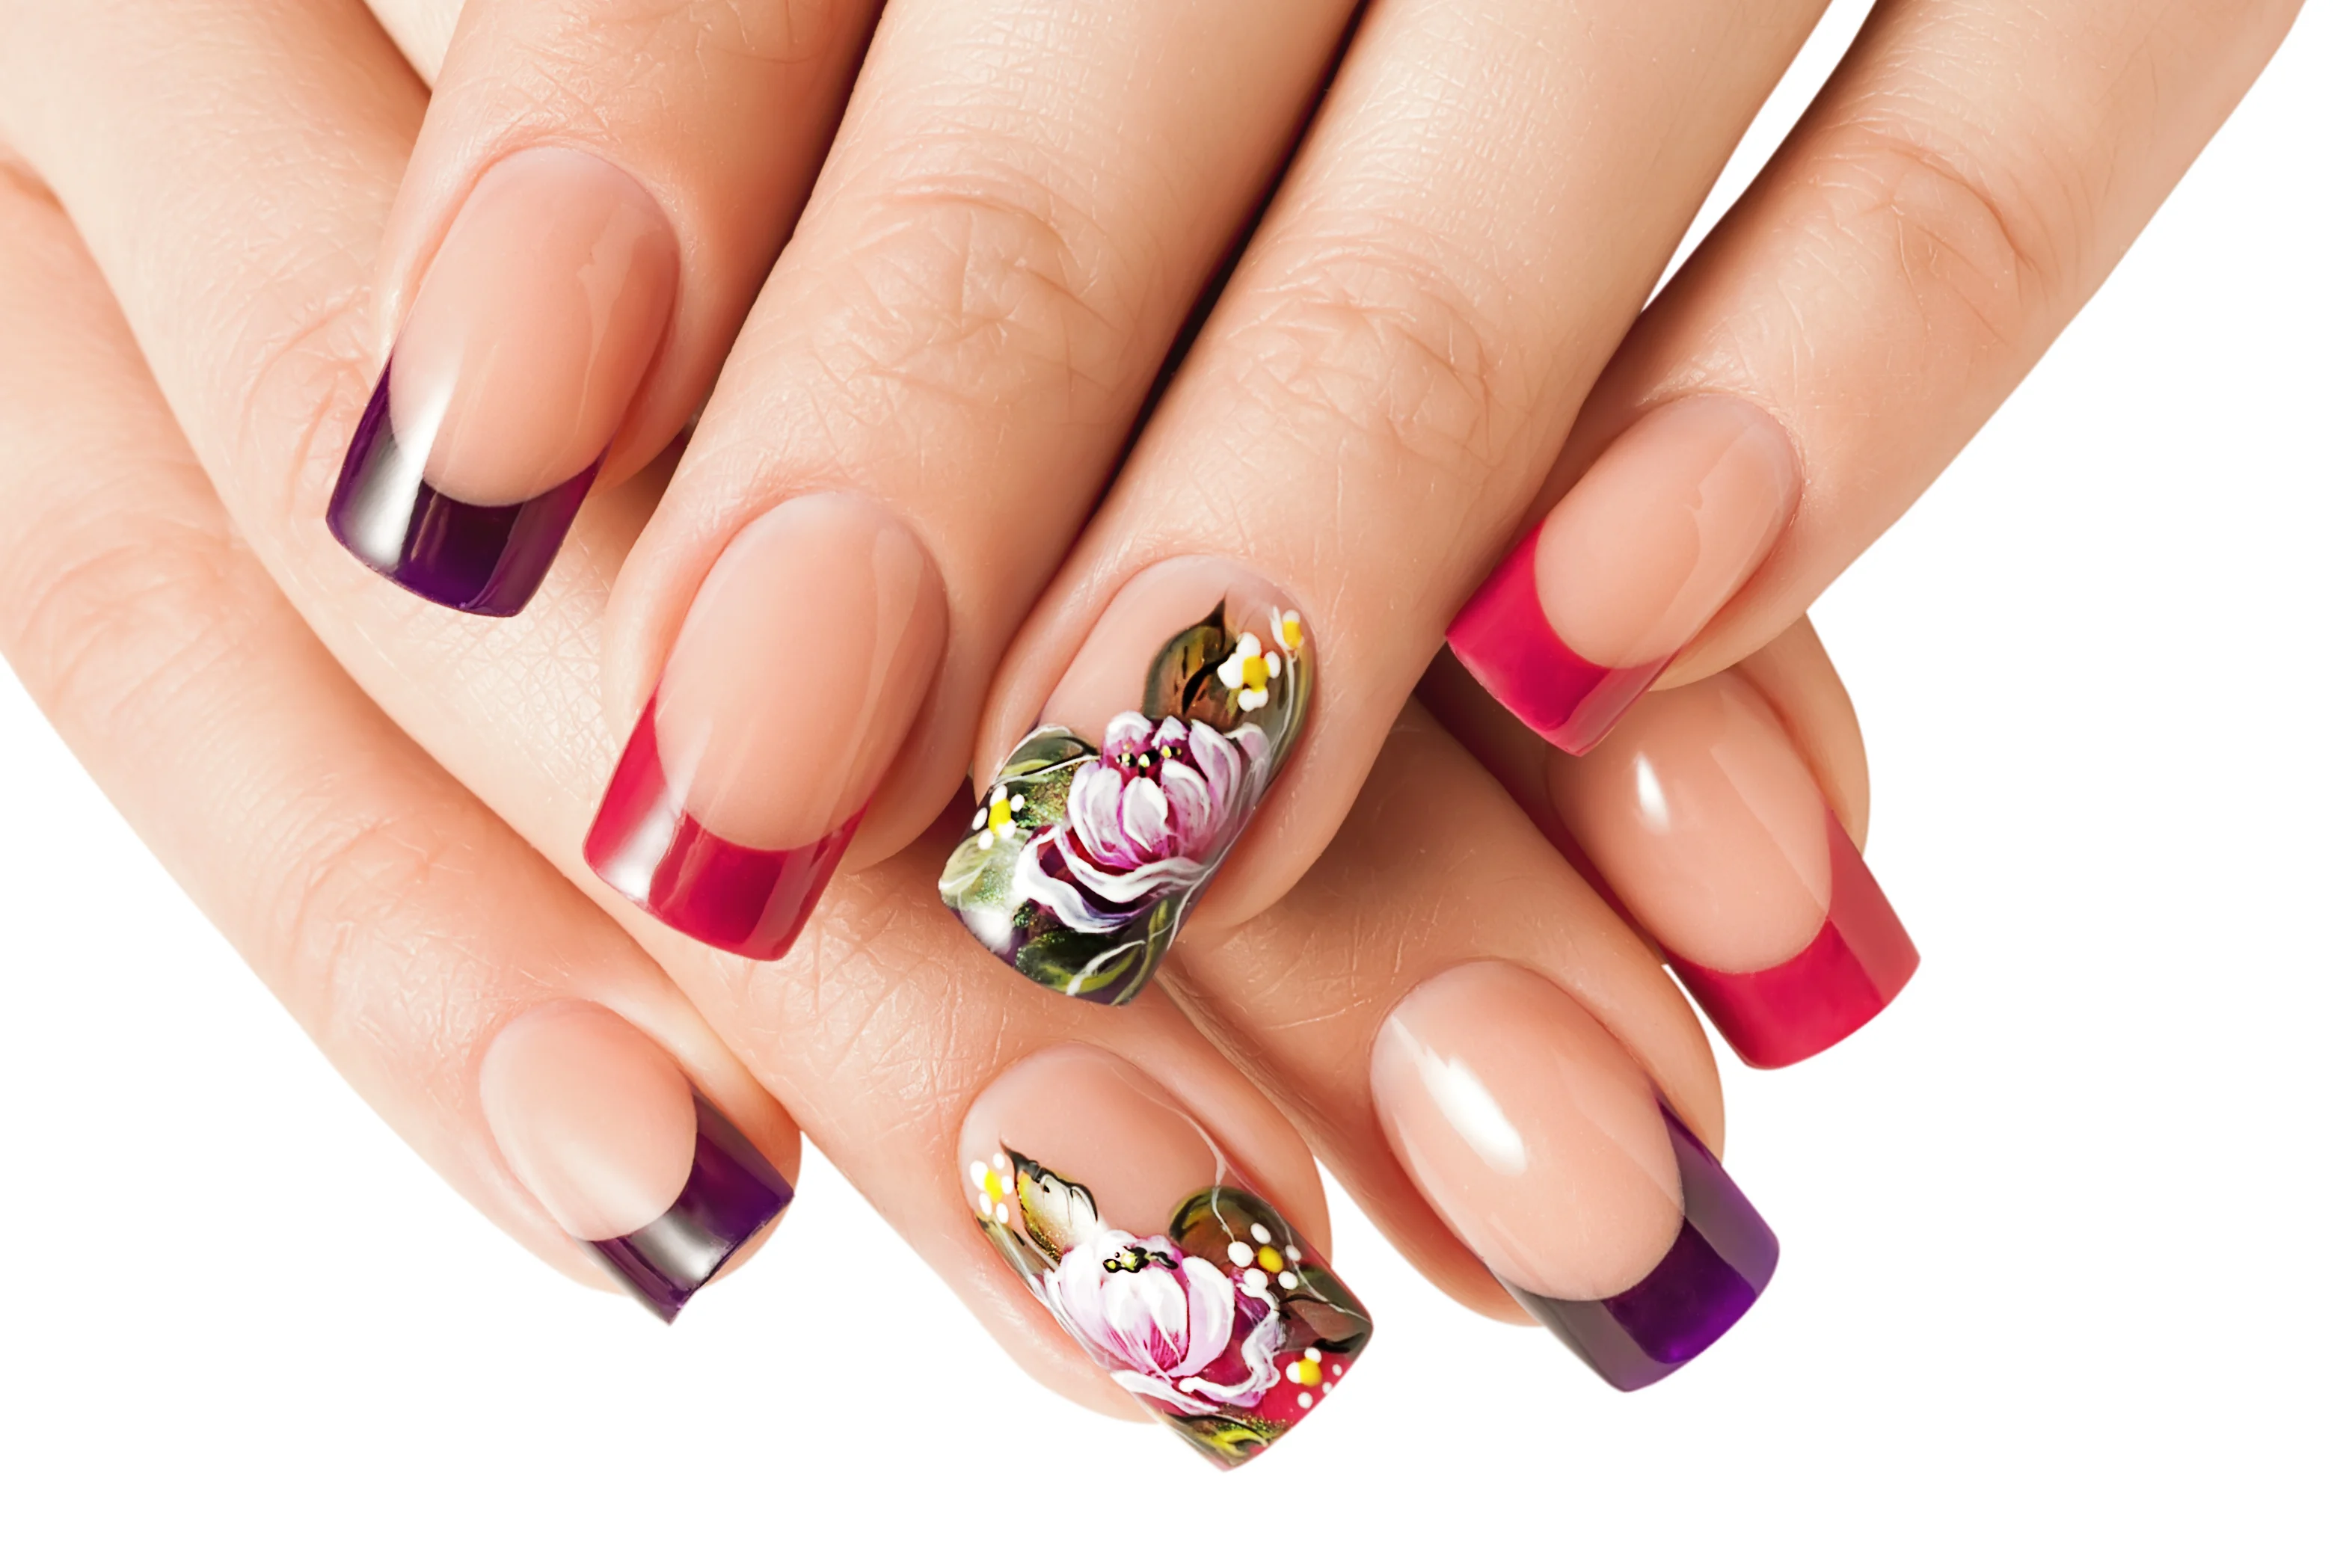 Beautiful-nails-with-cute-patterns-Livecreative.in